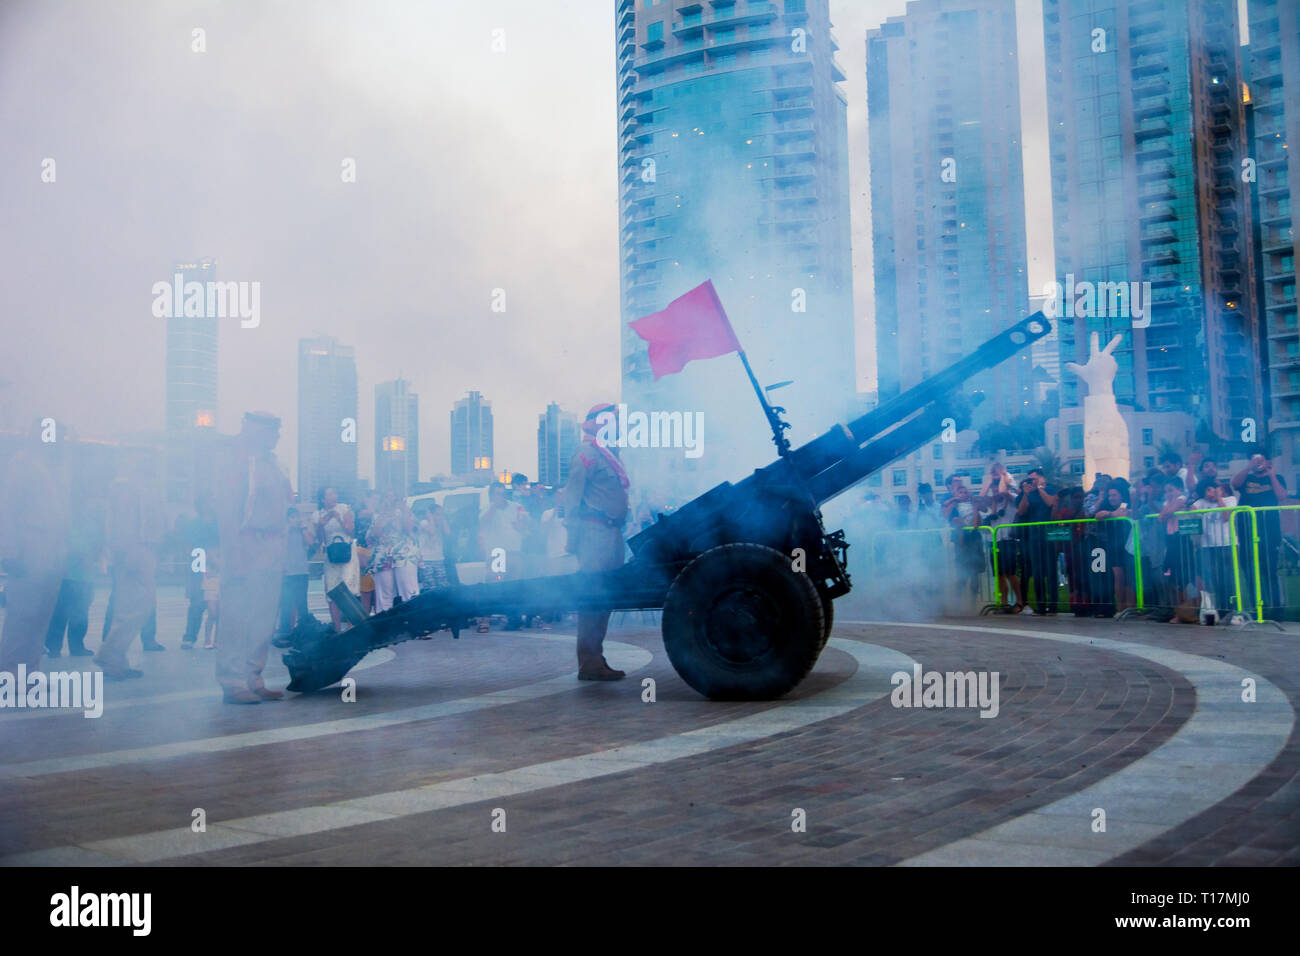 Dubai, United Arab Emirates - May 18, 2018: Ramadan Canon firing in front of the Dubai mall fountain to signal the end of the daily fast and beginning Stock Photo